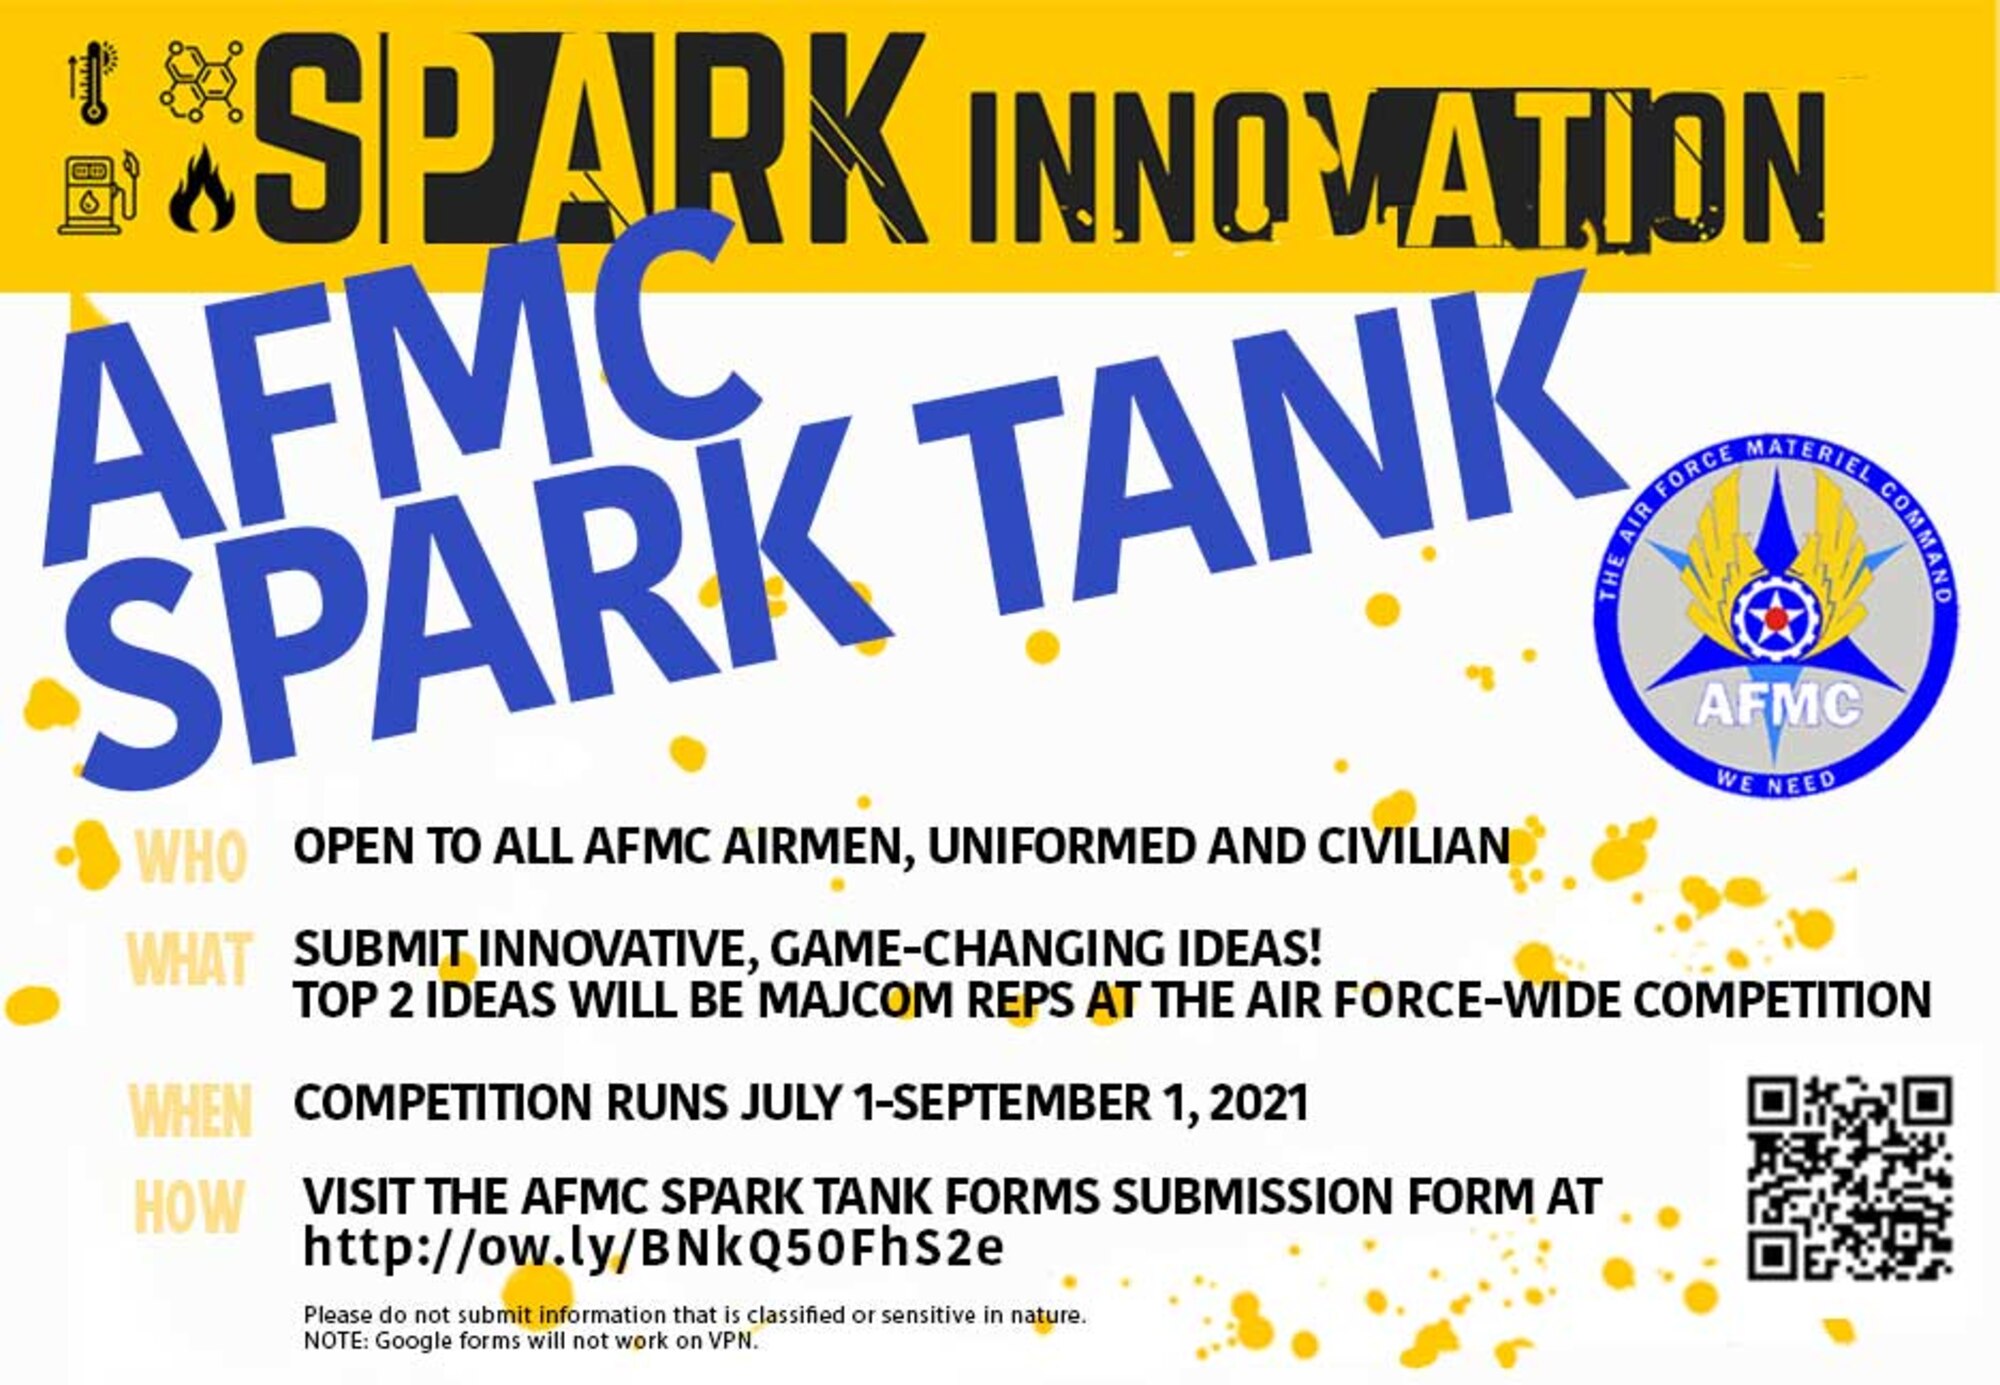 Spark Tank competition graphic